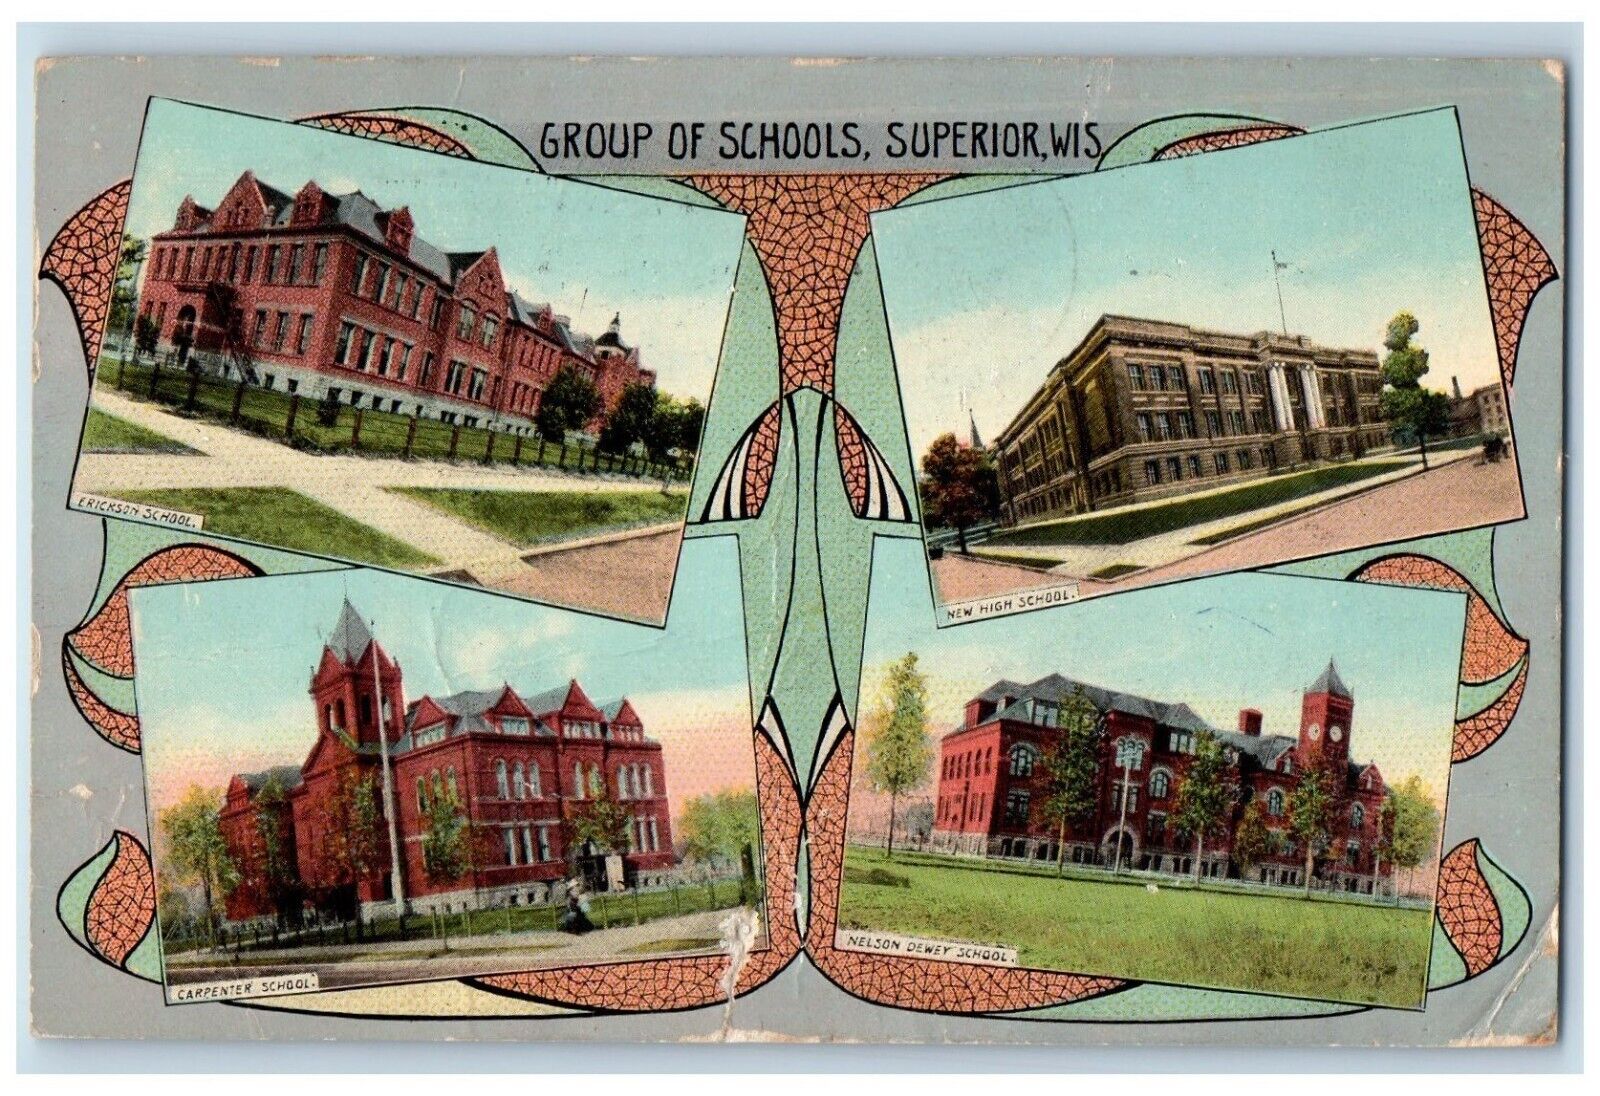 1912 Group of Schools Multi-View  Superior Wisconsin WI Vintage Antique Postcard